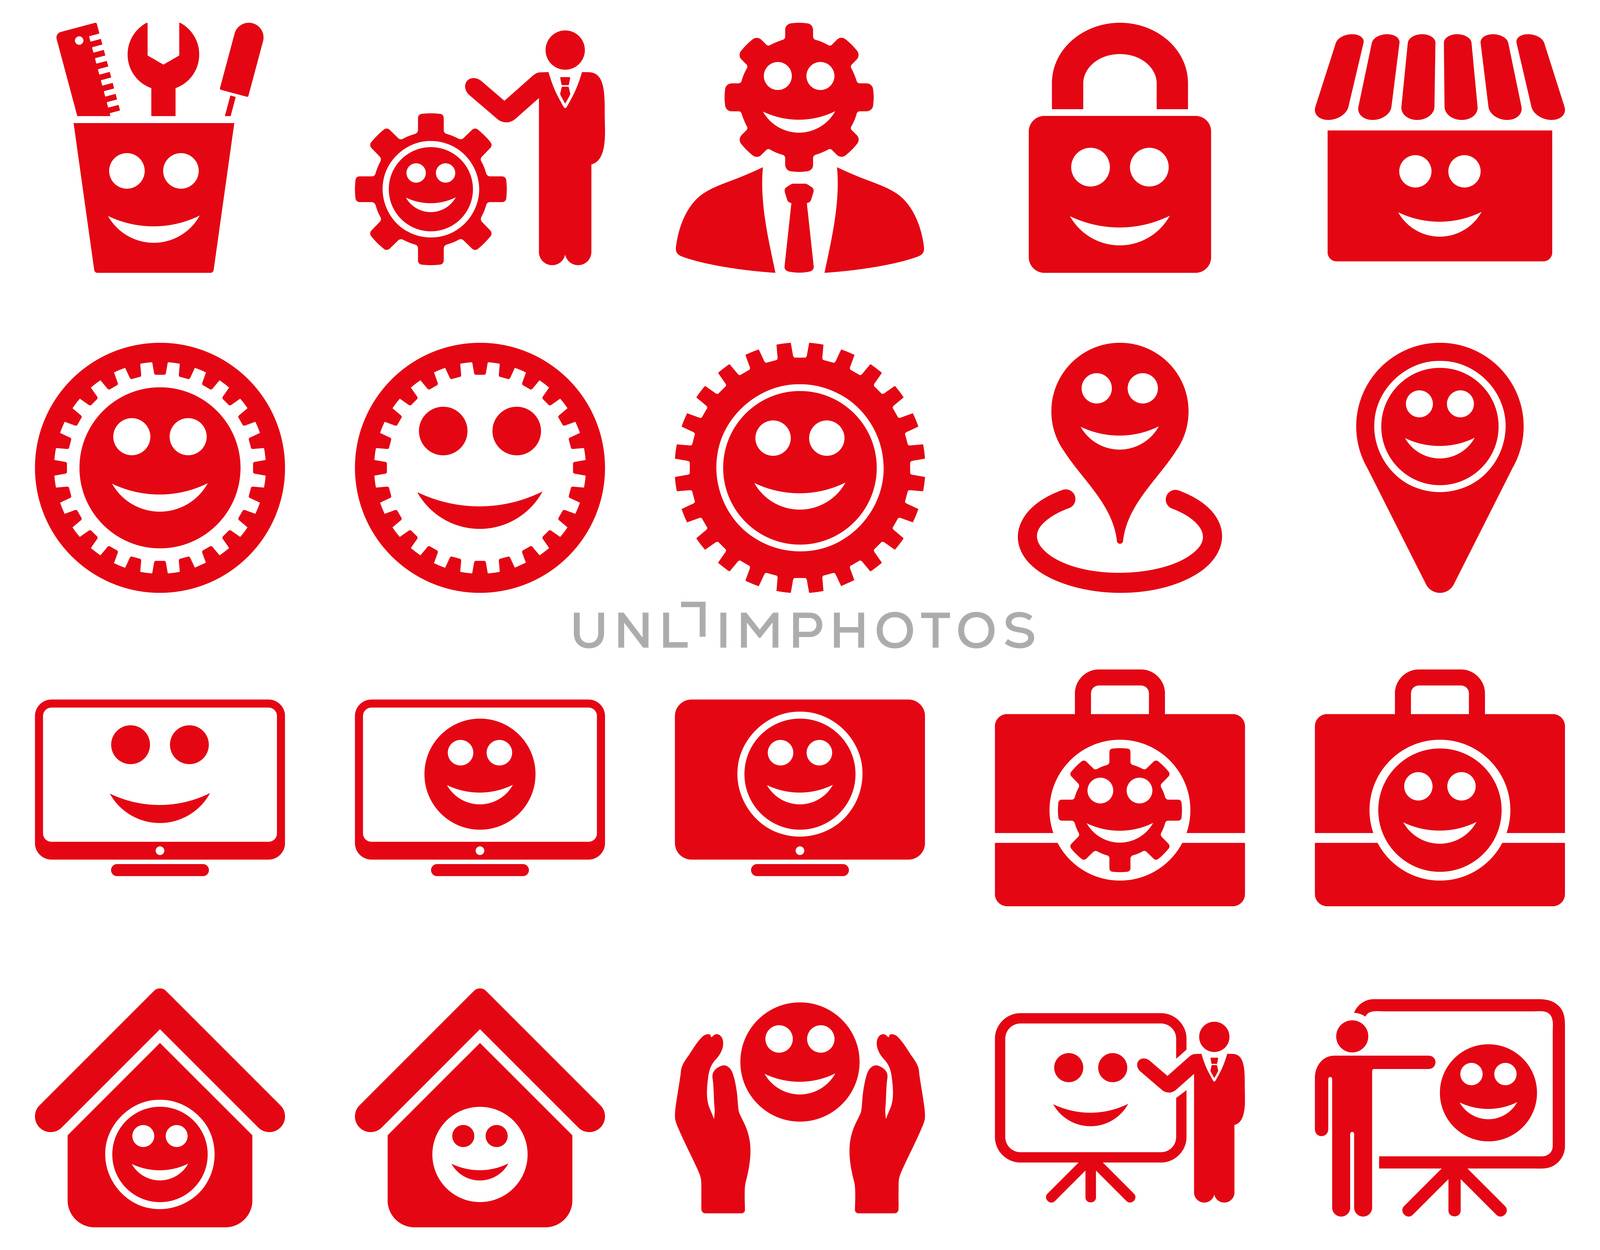 Tools, gears, smiles, management icons. Glyph set style is flat images, red symbols, isolated on a white background.